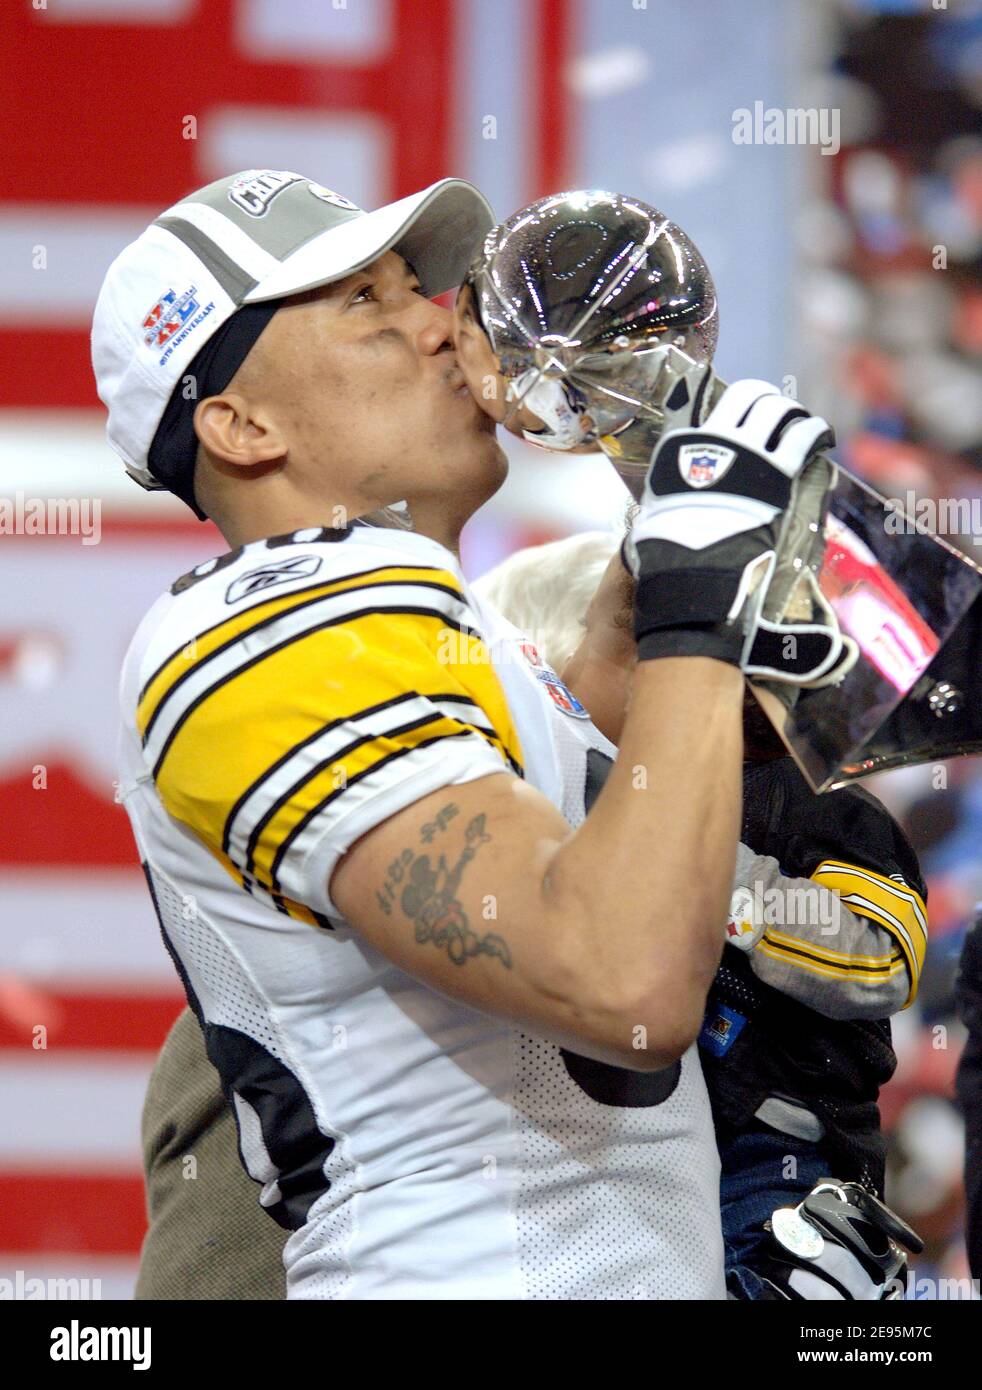 Pittsburgh Steelers receiver and game MVP Hines Ward kisses the Lombardi Trophy after a 21-10 victory over the Seattle Seahawks in Super Bowl XL in Detroit, Michigan, USA, on Sunday, February 5, 2006. Photo By Lionel Hahn/Cameleon/ABACAPRESS.COM Stock Photo